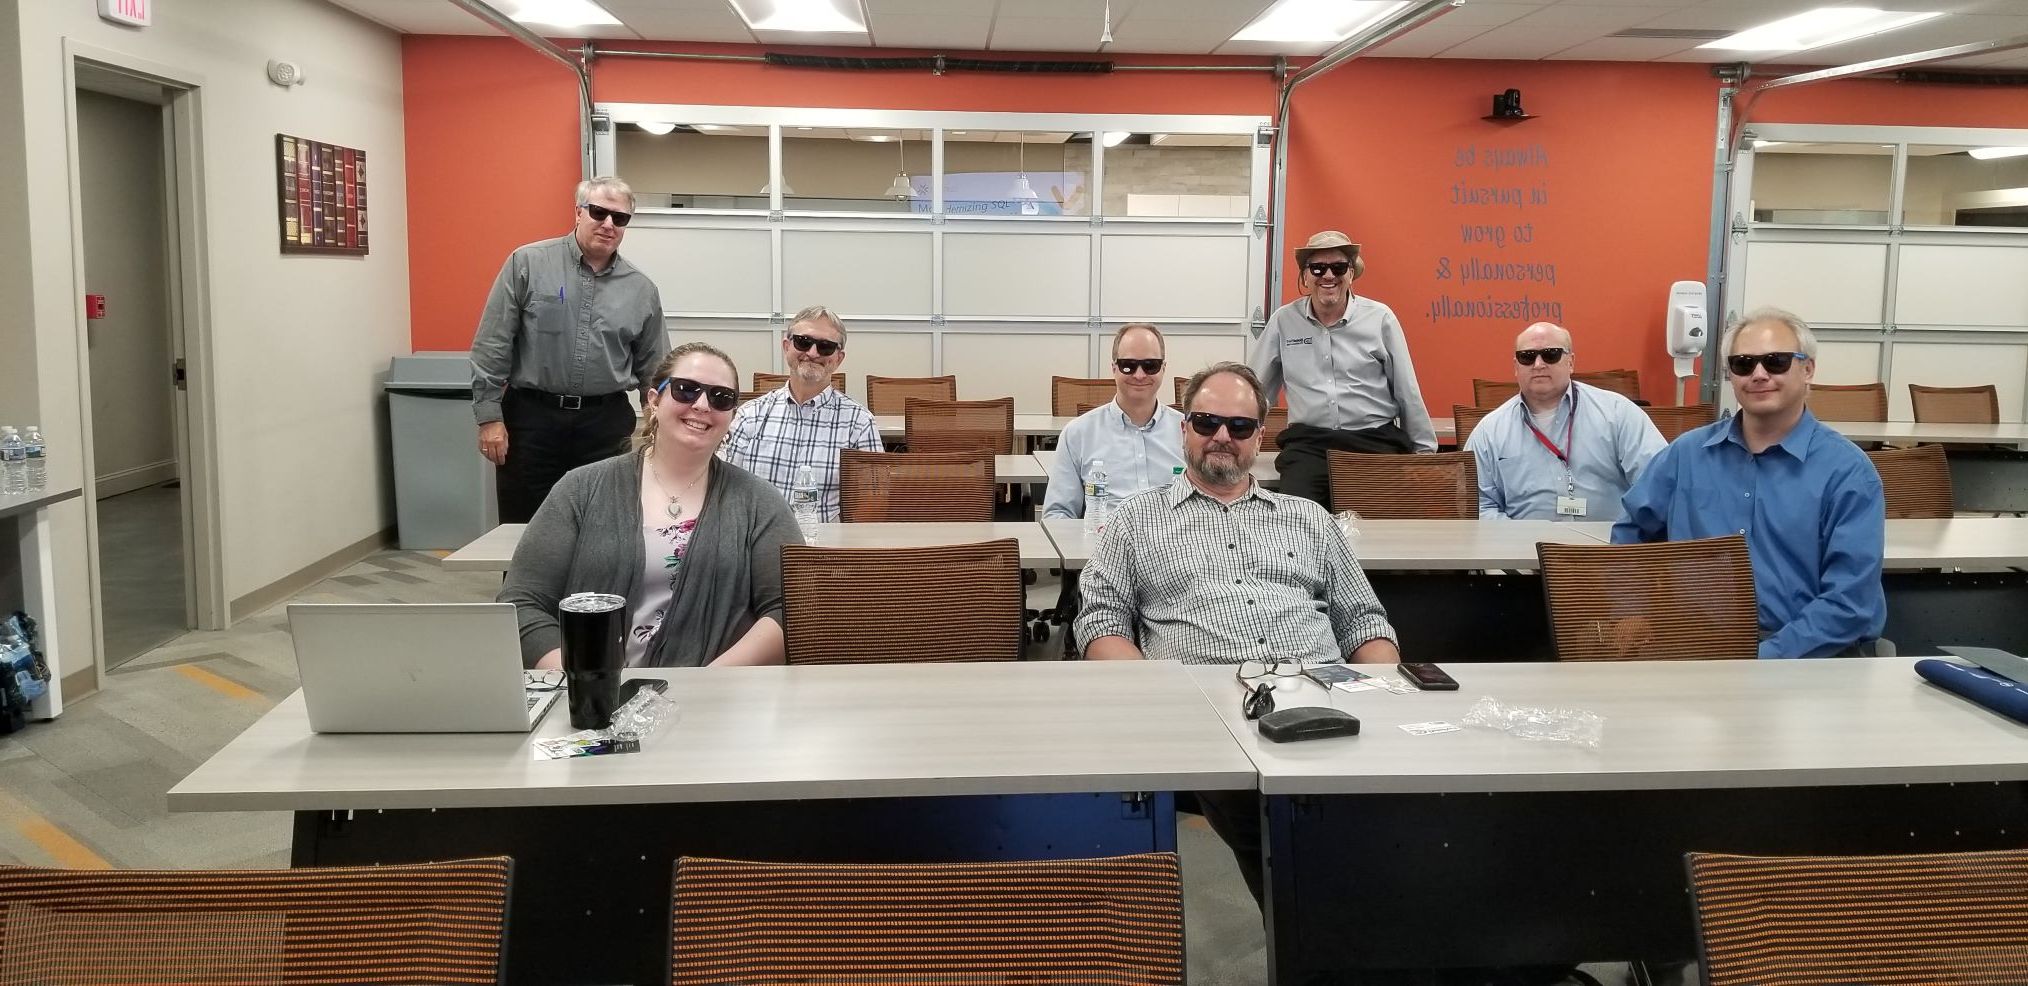 Sql Server Modern Migration Tour – Cleveland Edition Throughout Cleveland Server (Gallery 7 of 20)